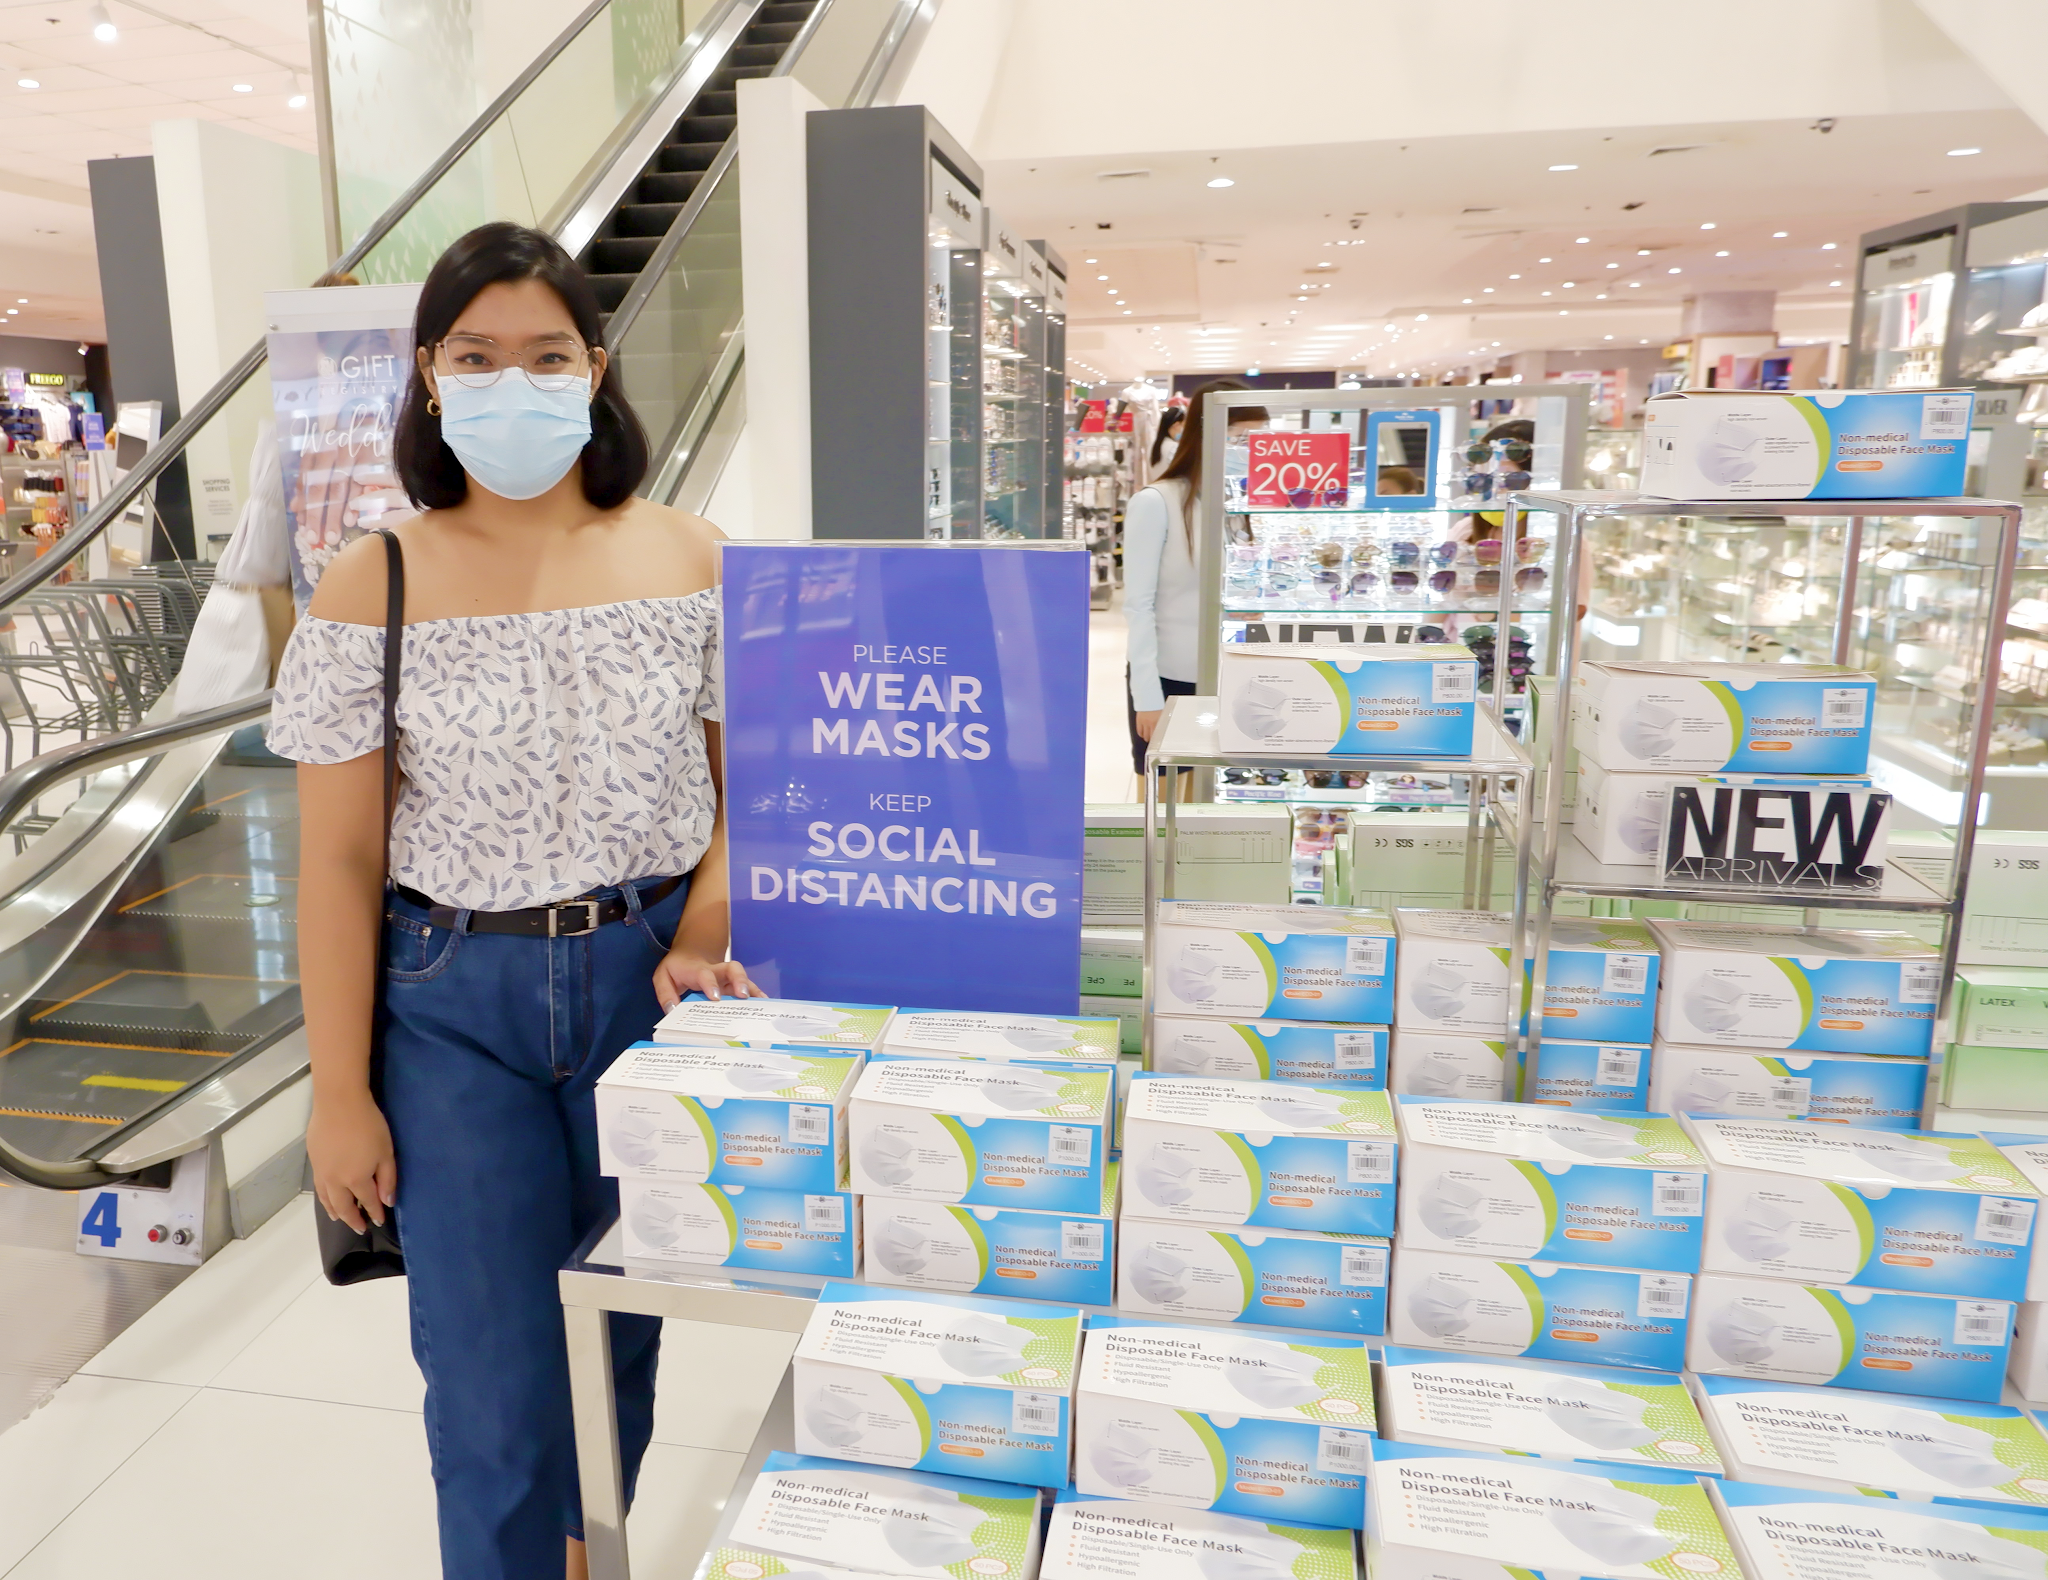 So today, let me share my #SMartMalling experience when it comes to shopping at SM City Dasmariñas. Read my full experience on the blog!